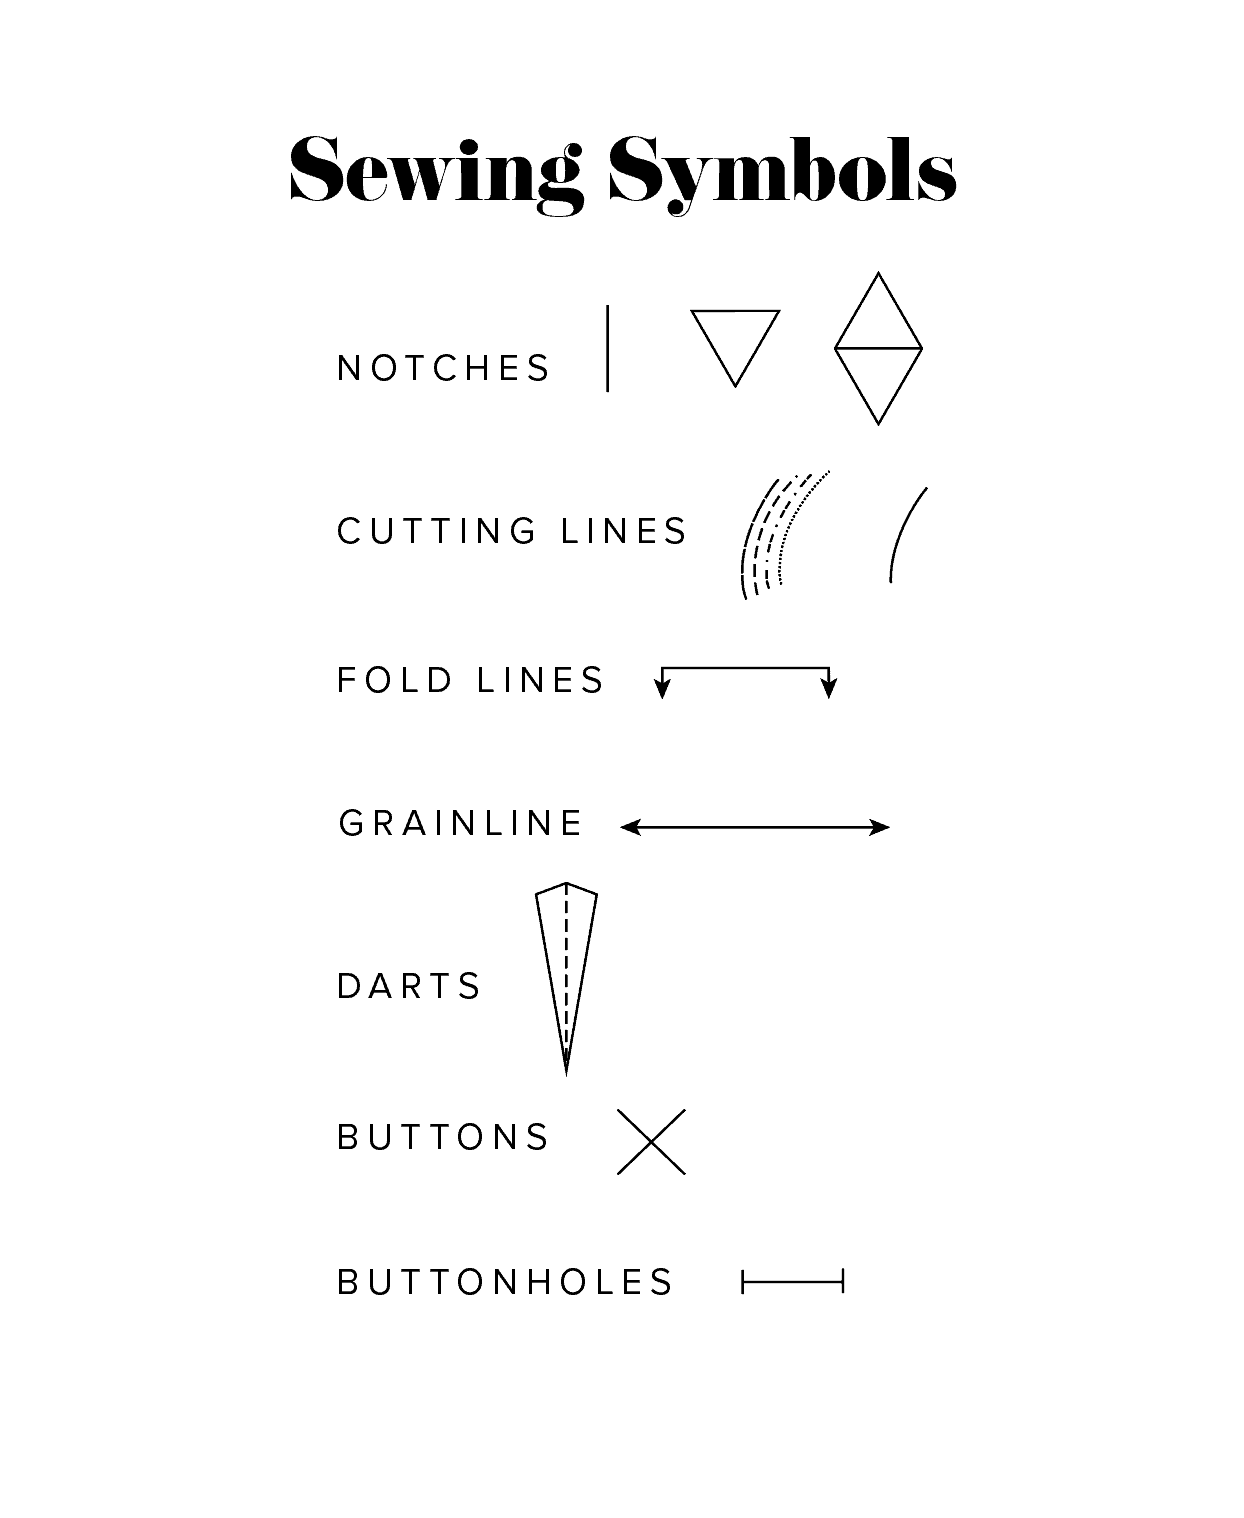 How to Read a Sewing Pattern